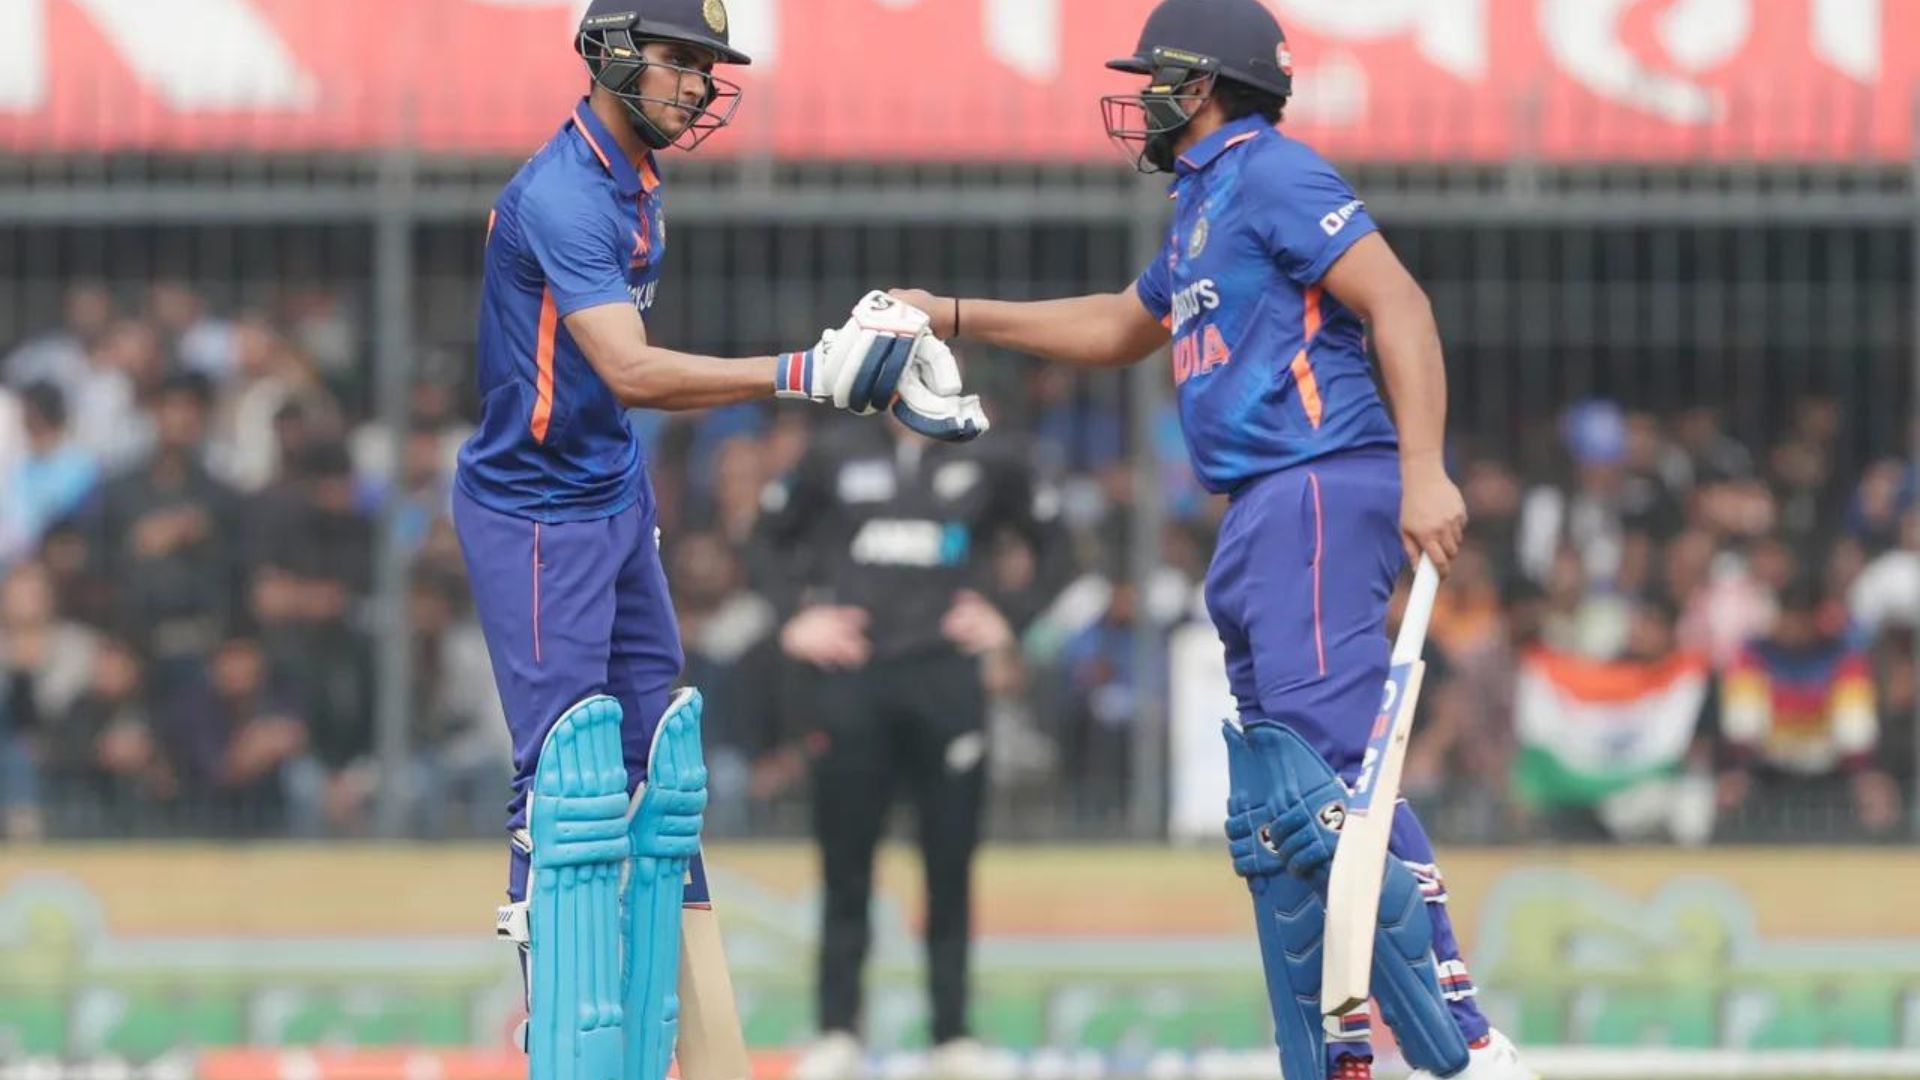 Shubman Gill and Rohit Sharma strung together a 212-run opening partnership in the final ODI against New Zealand. [P/C: BCCI]